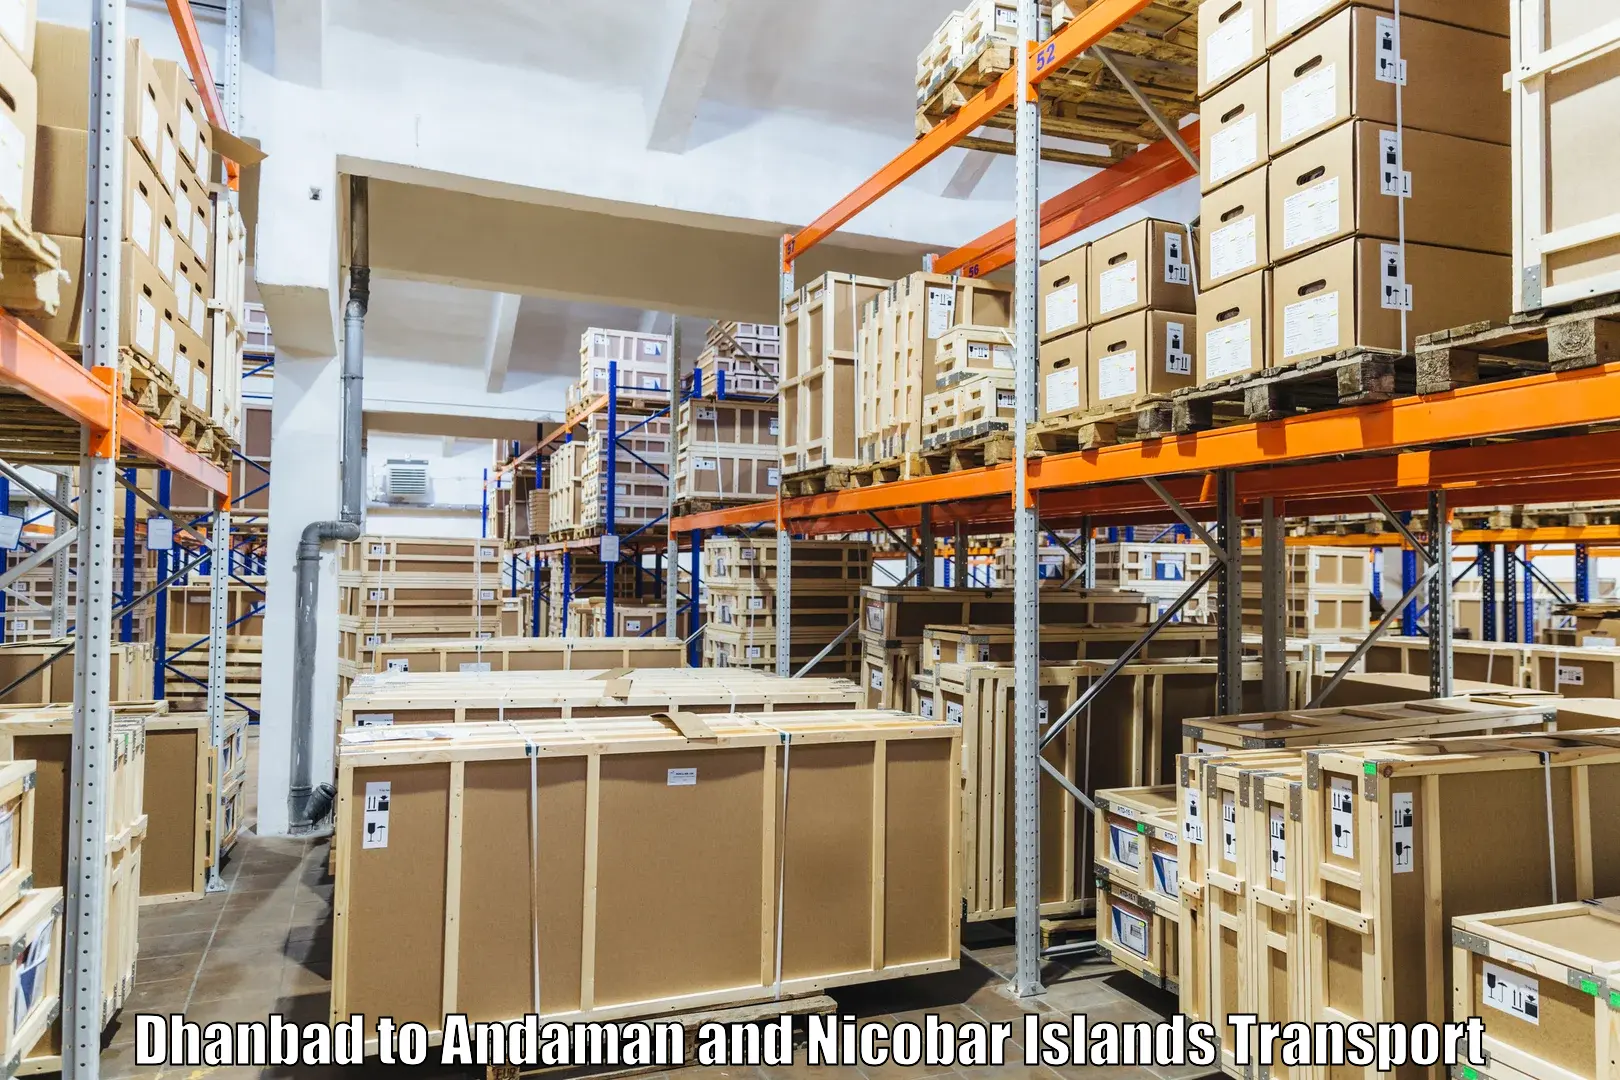 Truck transport companies in India Dhanbad to Andaman and Nicobar Islands